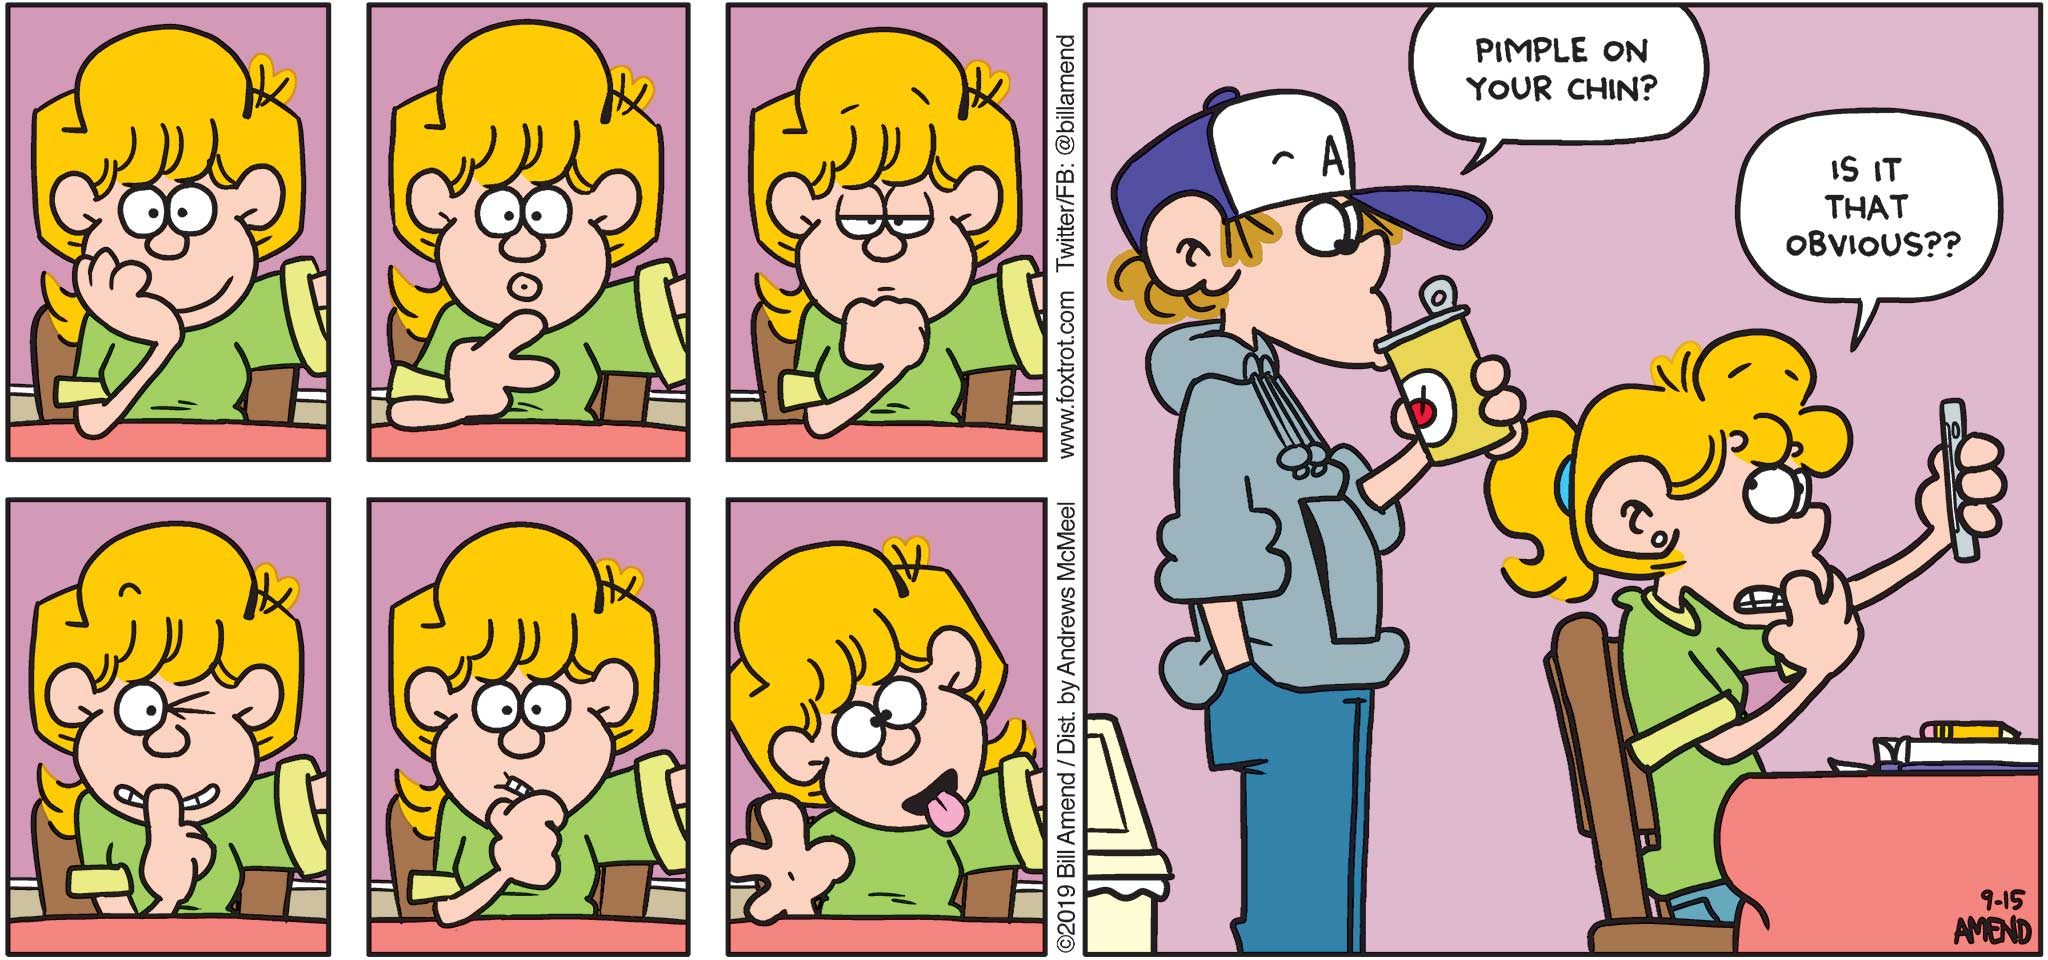 FoxTrot by Bill Amend - "Coverup" published September 15, 2019 - Peter: Pimple on your chin? Paige: Is it that obvious??